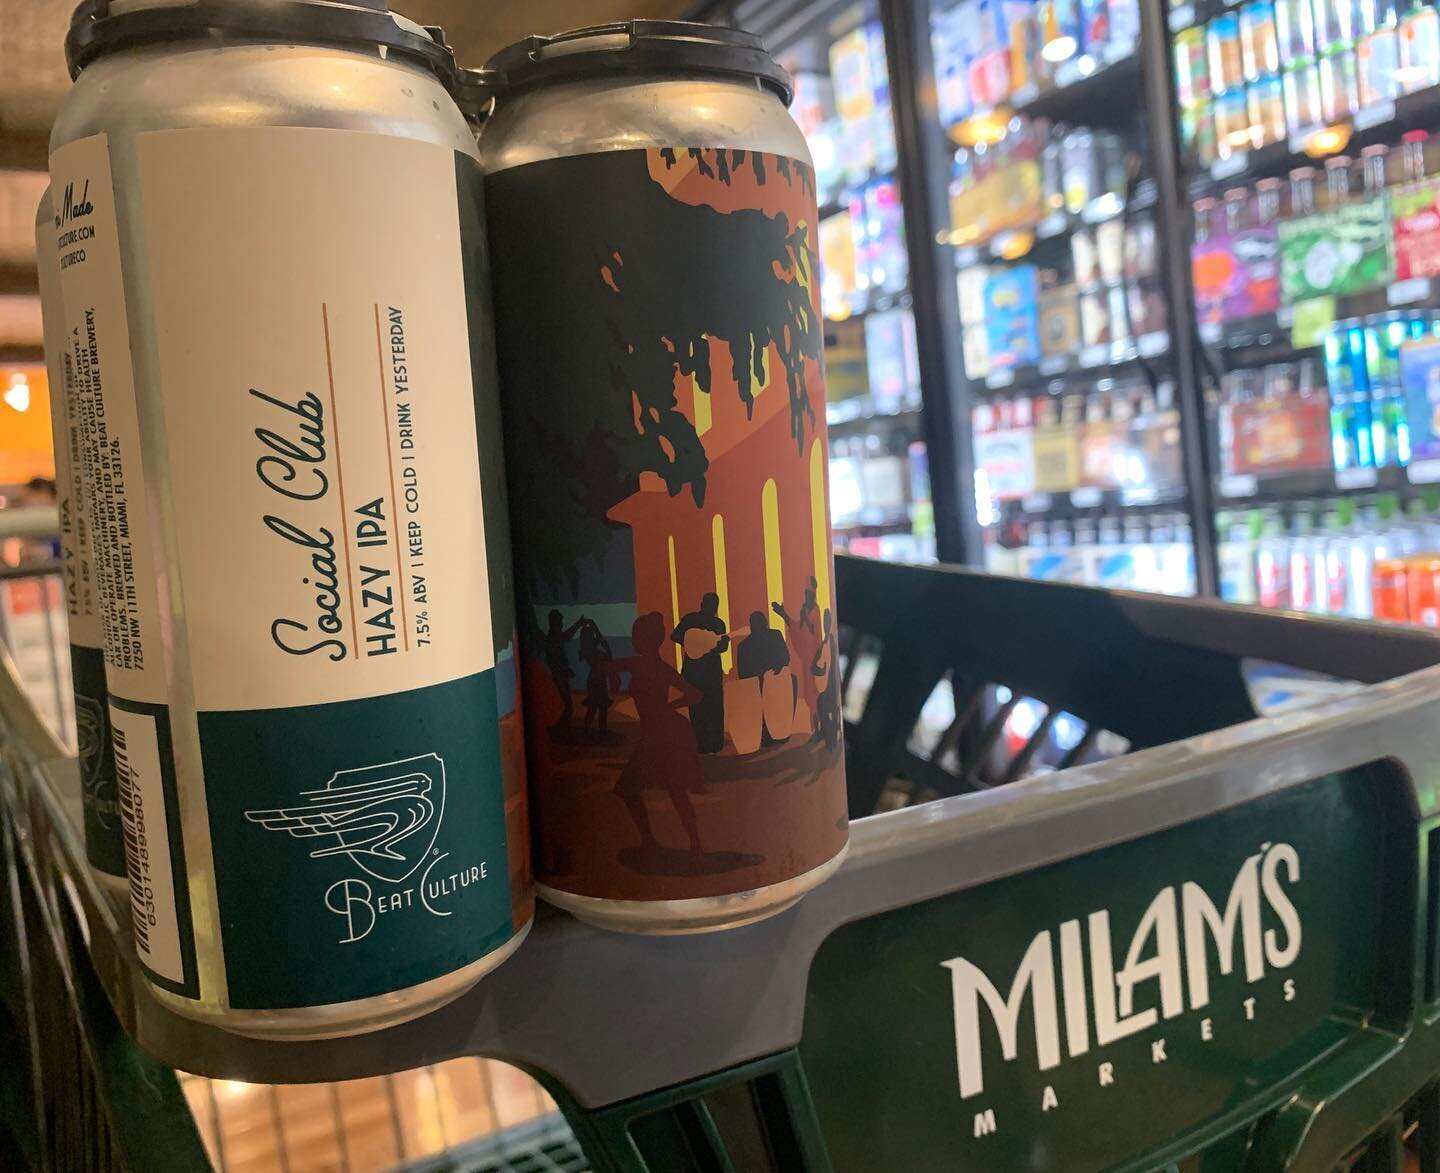 Social Club &amp; Halfway Crooks now available at Milam&rsquo;s Market Grove!!!⁣⁣
⁣⁣
We are proud to announce that you can now find Beat Culture Beer at @milamsmarket. We are excited to be available in our favorite, local and family-owned grocery sto